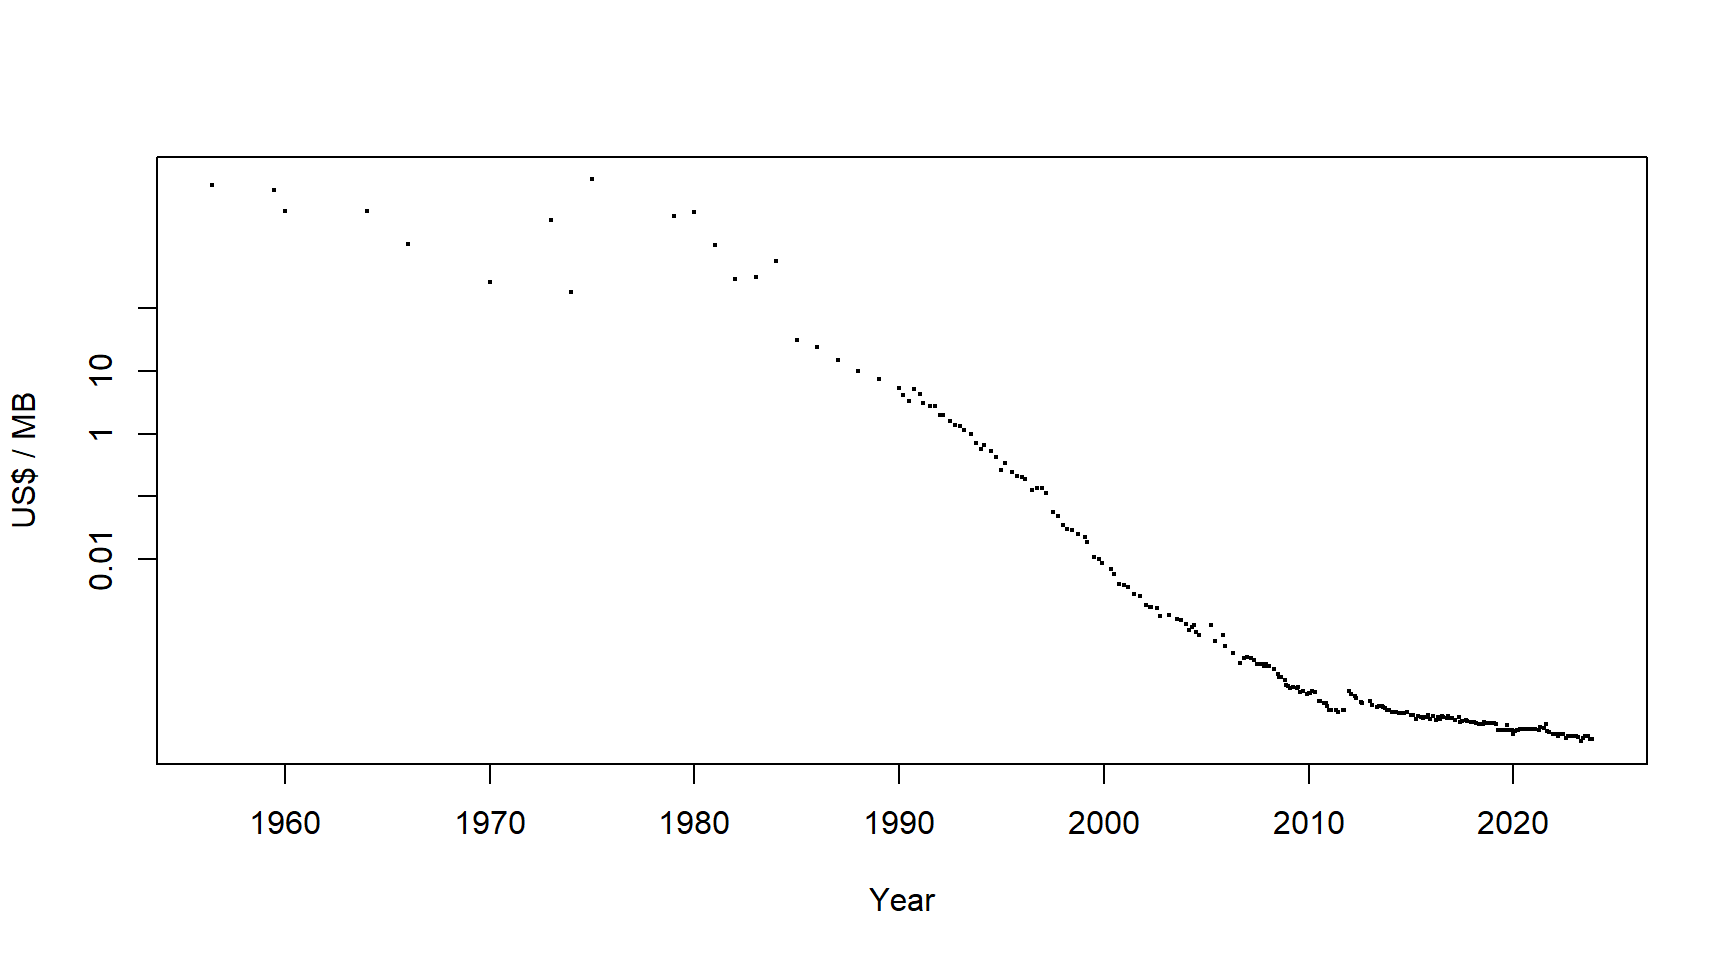 Storage costs per megabyte over time. Data from https://jcmit.net/diskprice.htm.